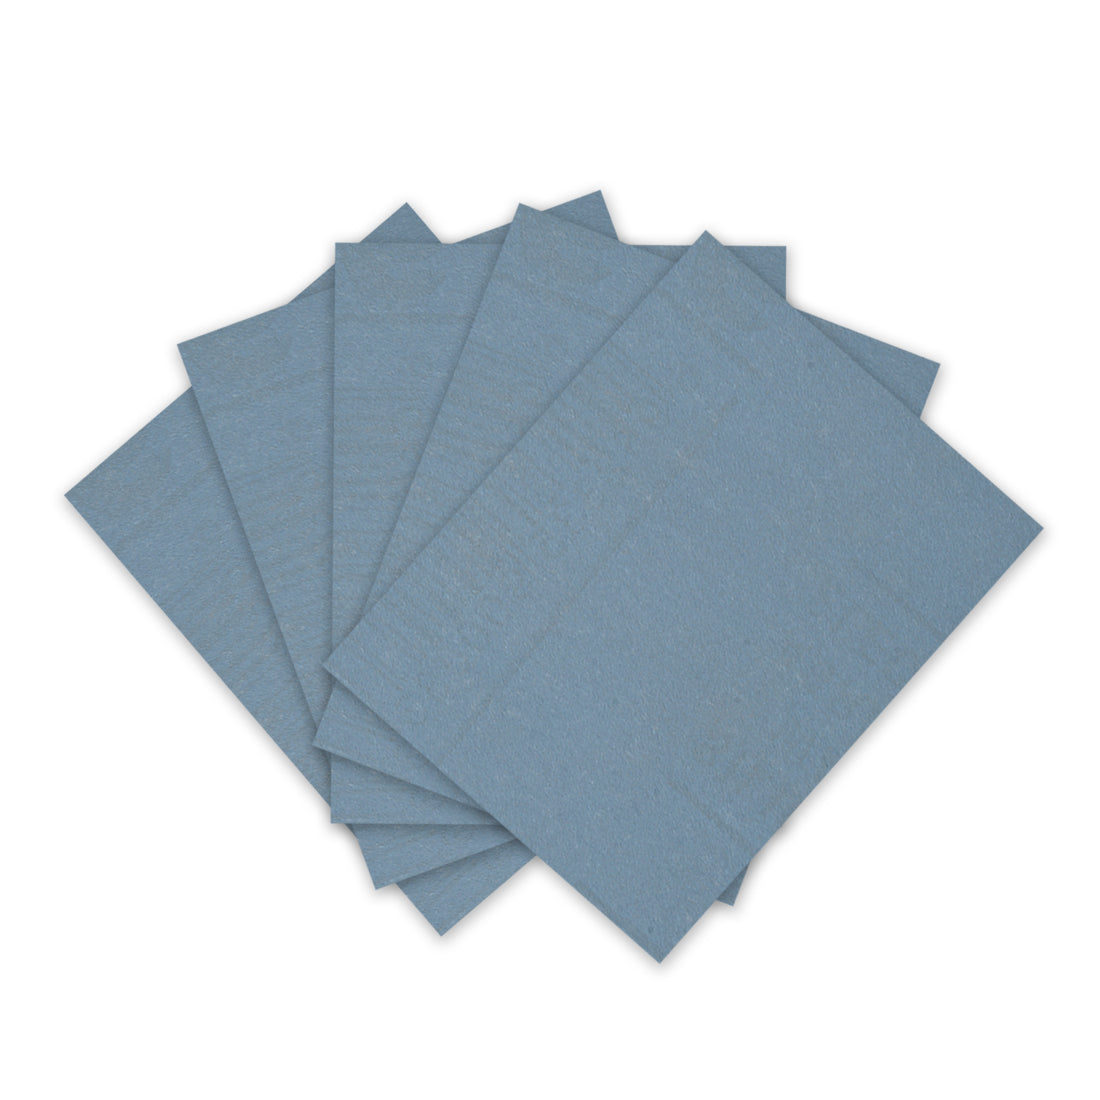 uxcell Uxcell 5pcs 8000 Grits Wet Dry Waterproof Sandpaper 9" x 11" Abrasive Paper Sheets